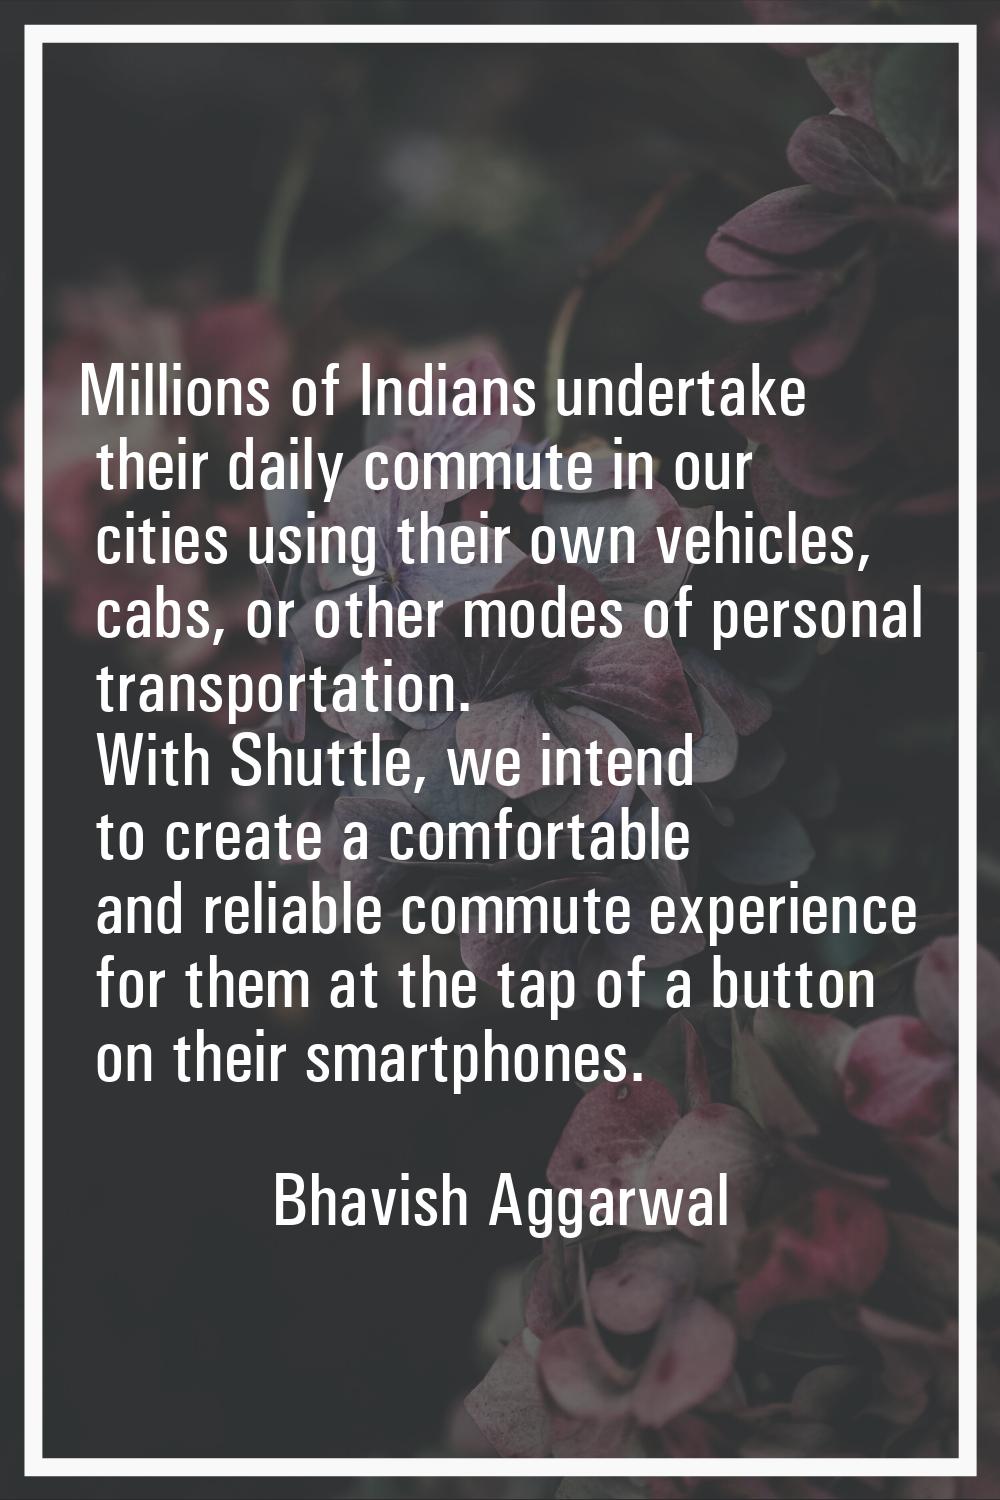 Millions of Indians undertake their daily commute in our cities using their own vehicles, cabs, or 